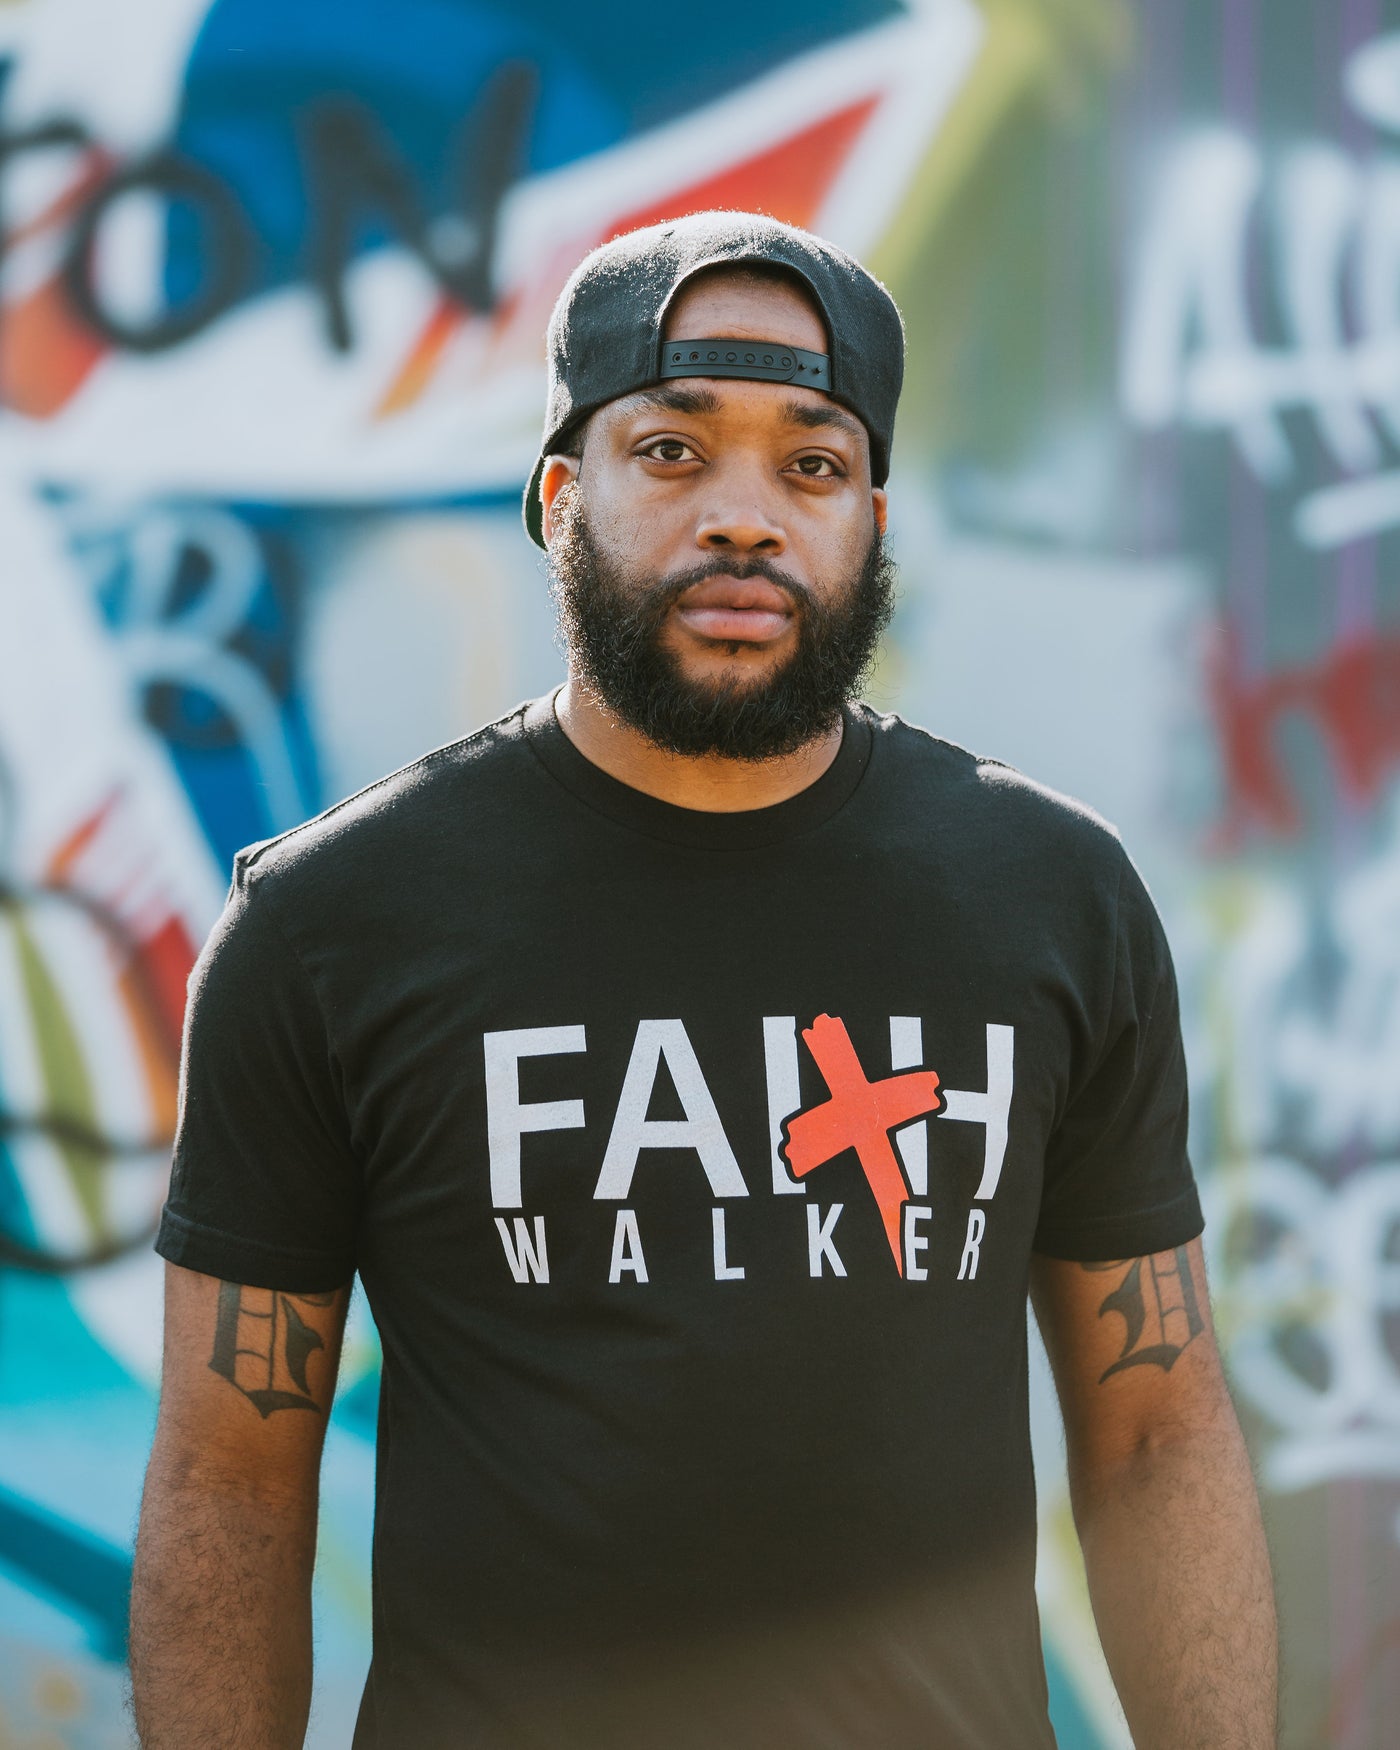 2 Corinthians 5:7 For we Walk by FAITH and not by Sight. Faith Walker Tee is an outward statement of your FAITH in God. The red Cross represents the Blood Jesus shed on the cross for our sins. As you rep your FAITH remember all you need is FAITH the size of a mustard seed.